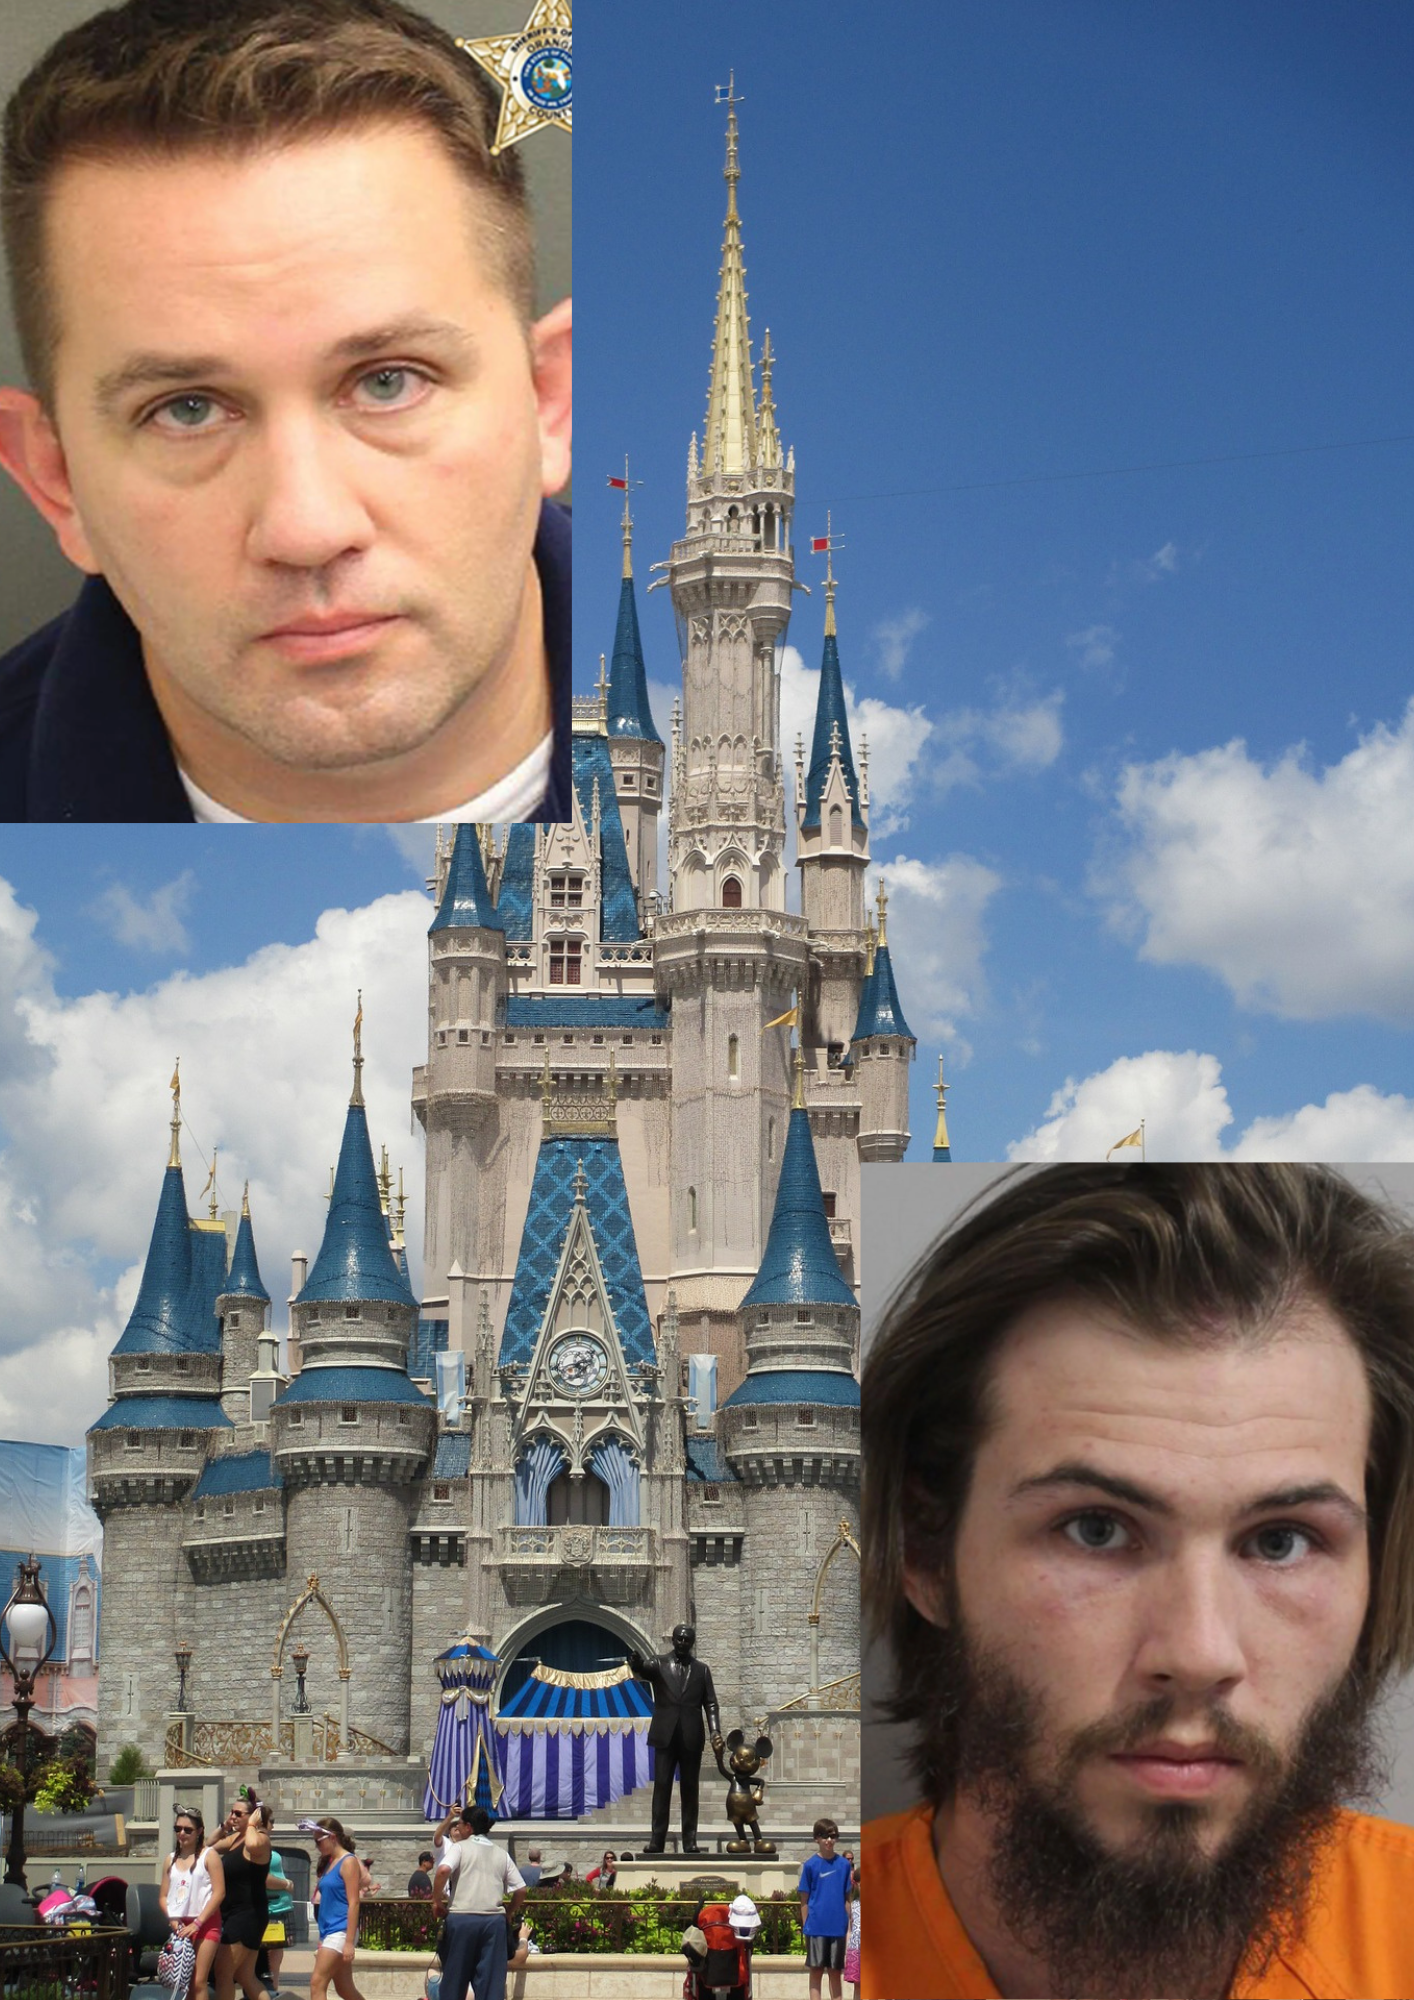 Operation Cyber Guardian II Nabs 2 More Disney Employees During Undercover Sexual Predator Sting 7